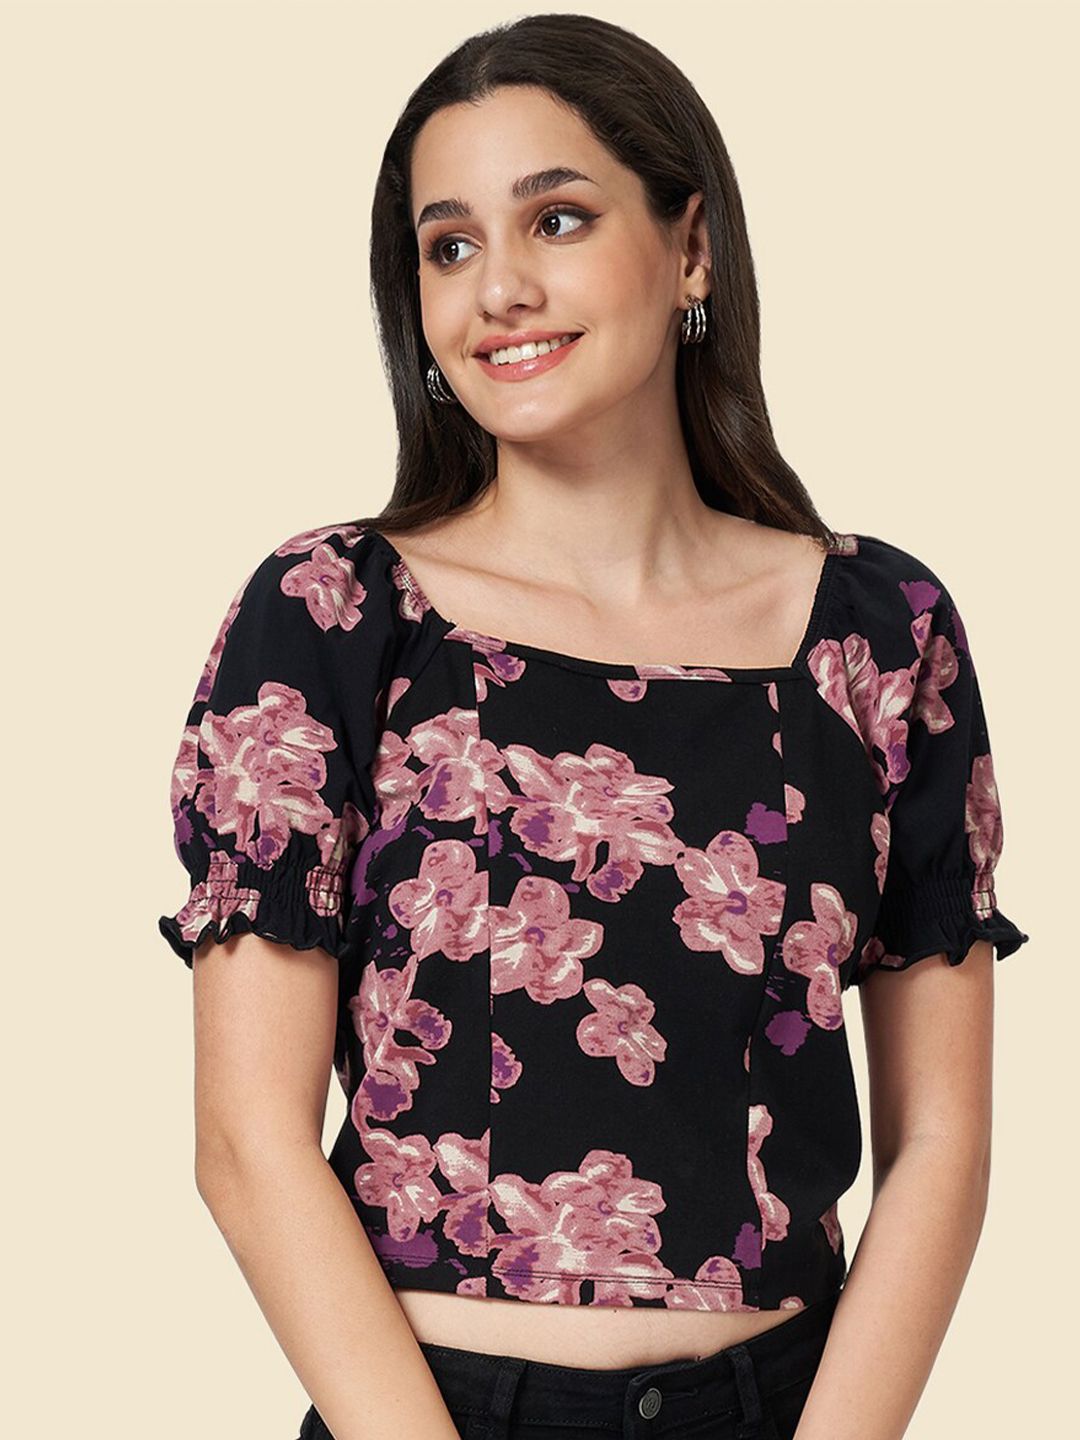 YU by Pantaloons Sweetheart Neck Floral Printed Cotton Crop Top Price in India